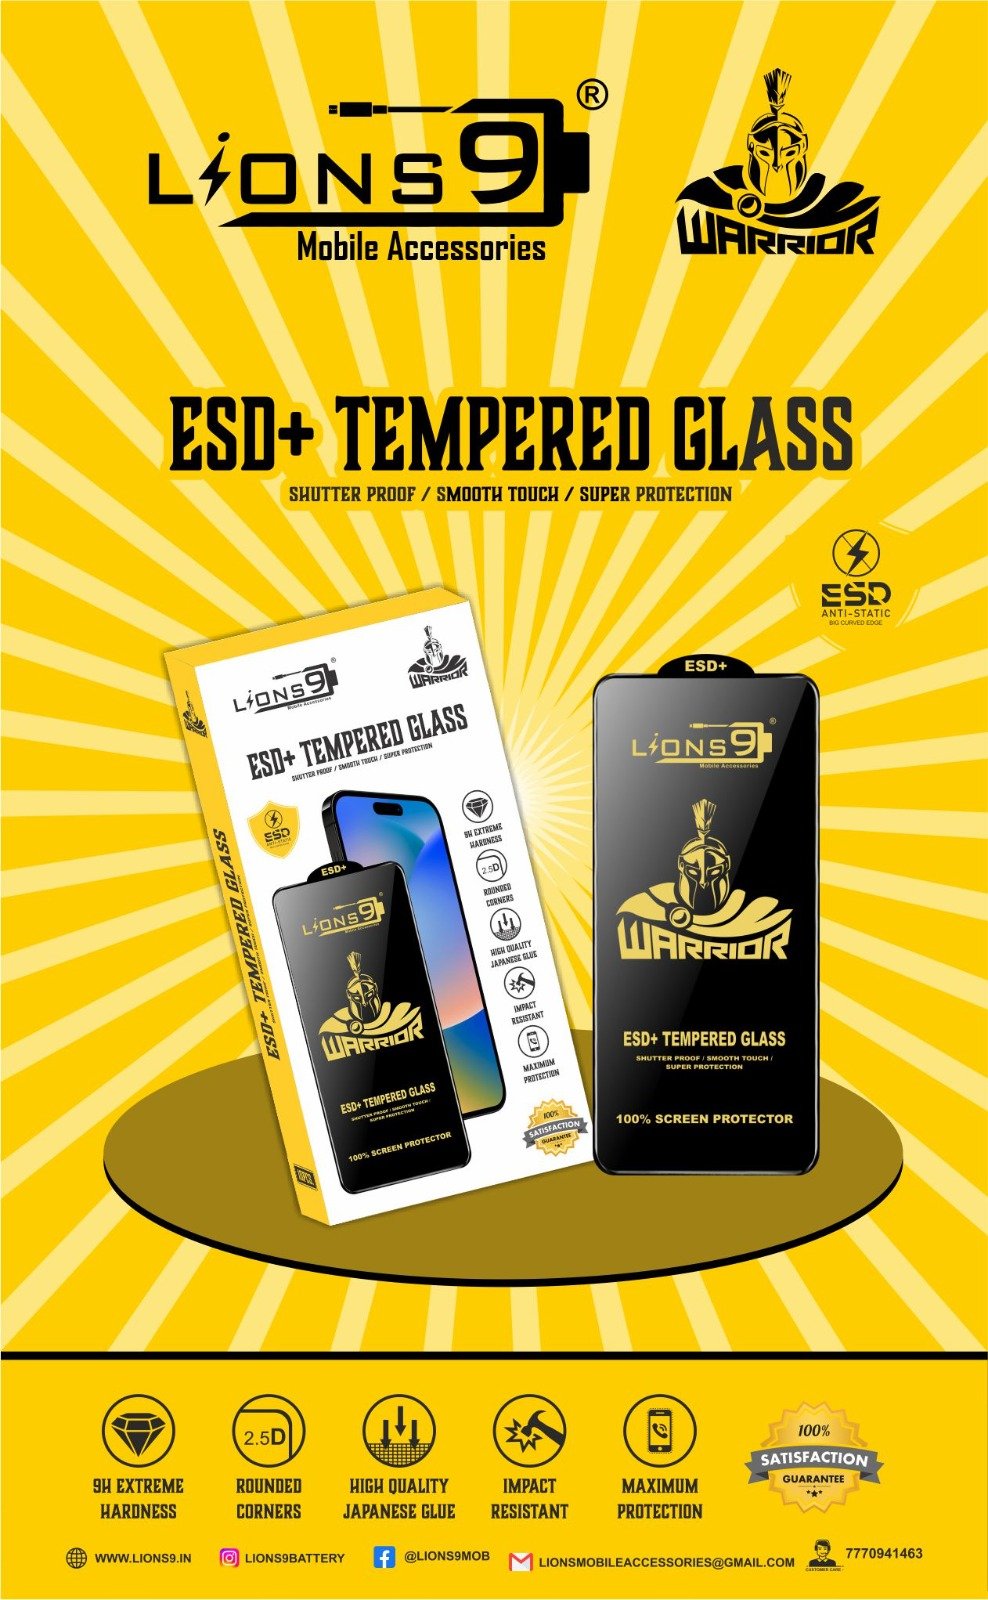 ESD TEMPERED GLASS 6D Lions9.in Mobile Accessories 